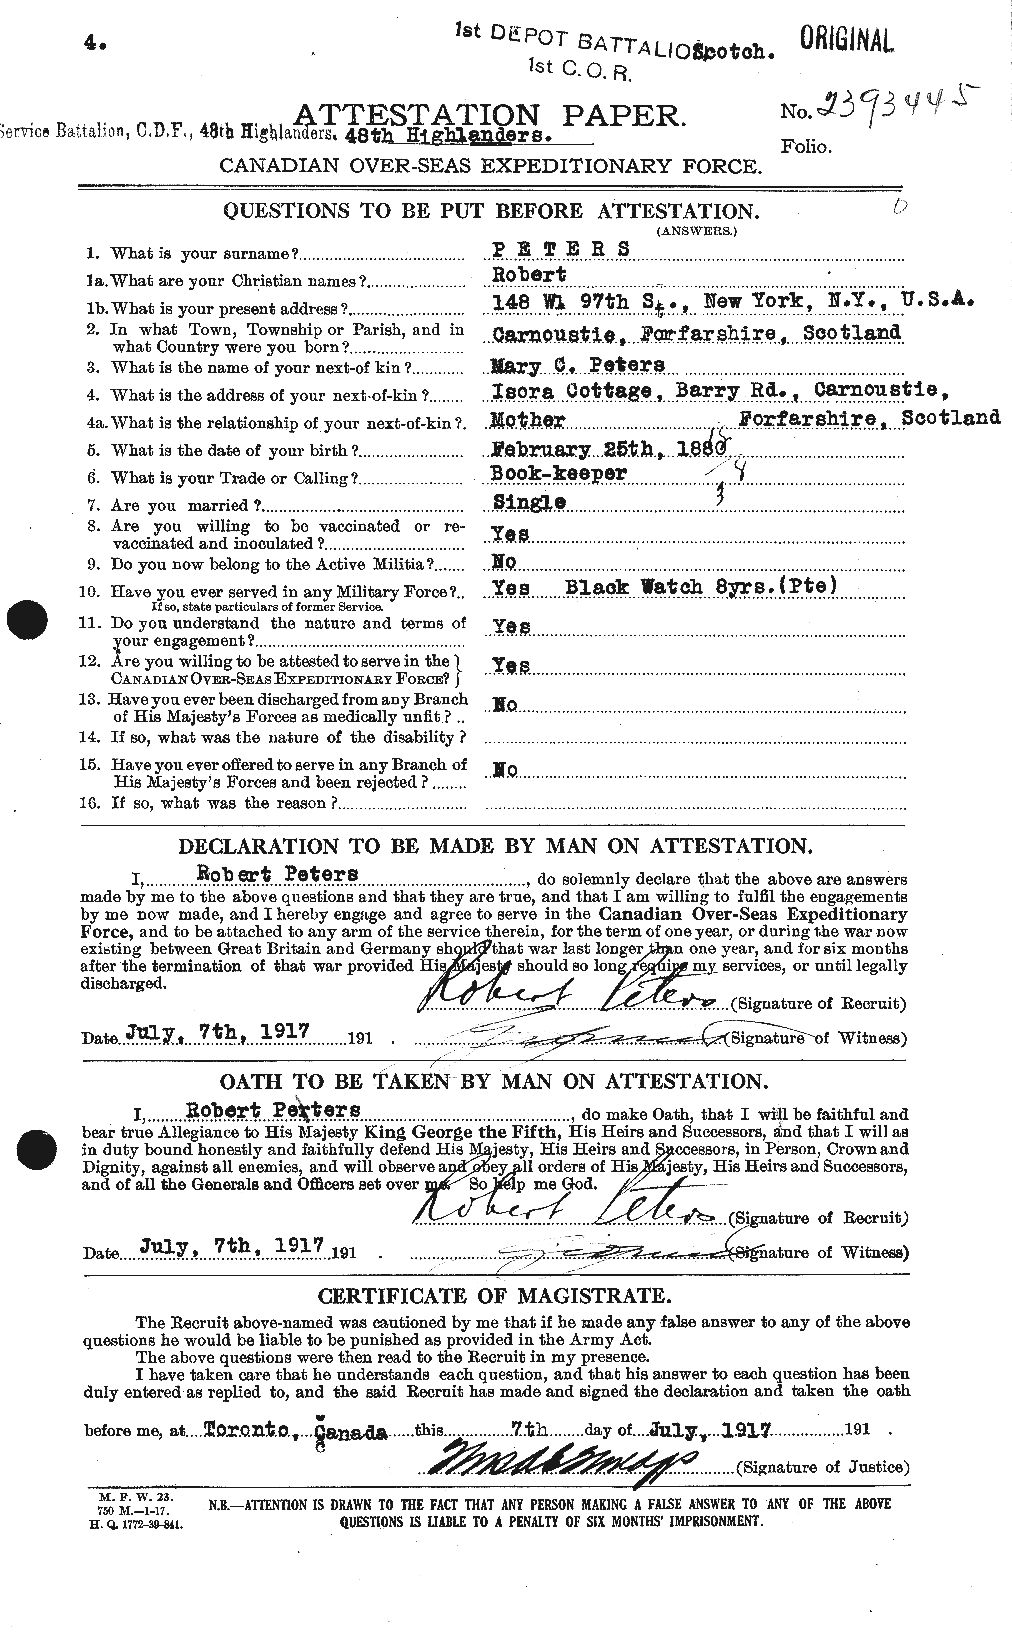 Personnel Records of the First World War - CEF 575607a